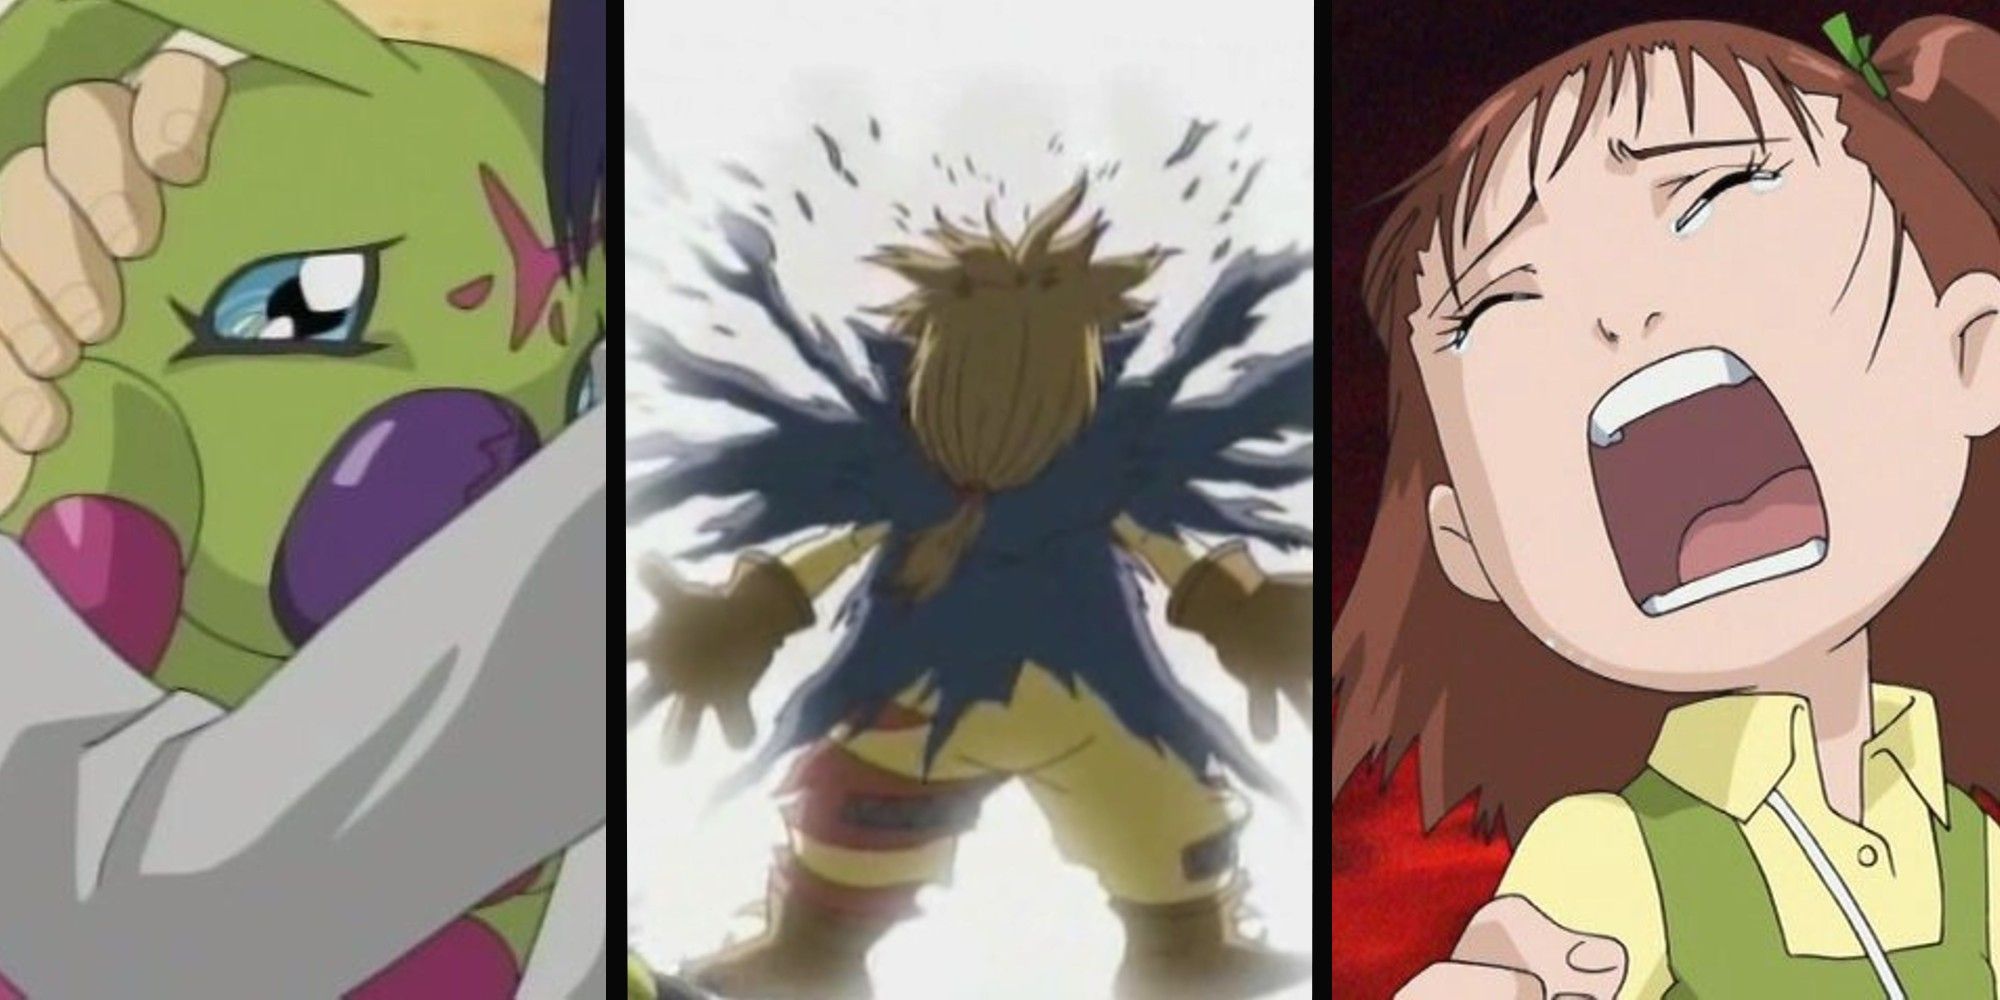 SoUh, what happened to the Digimon 02 cast? (Tri Spoilers)